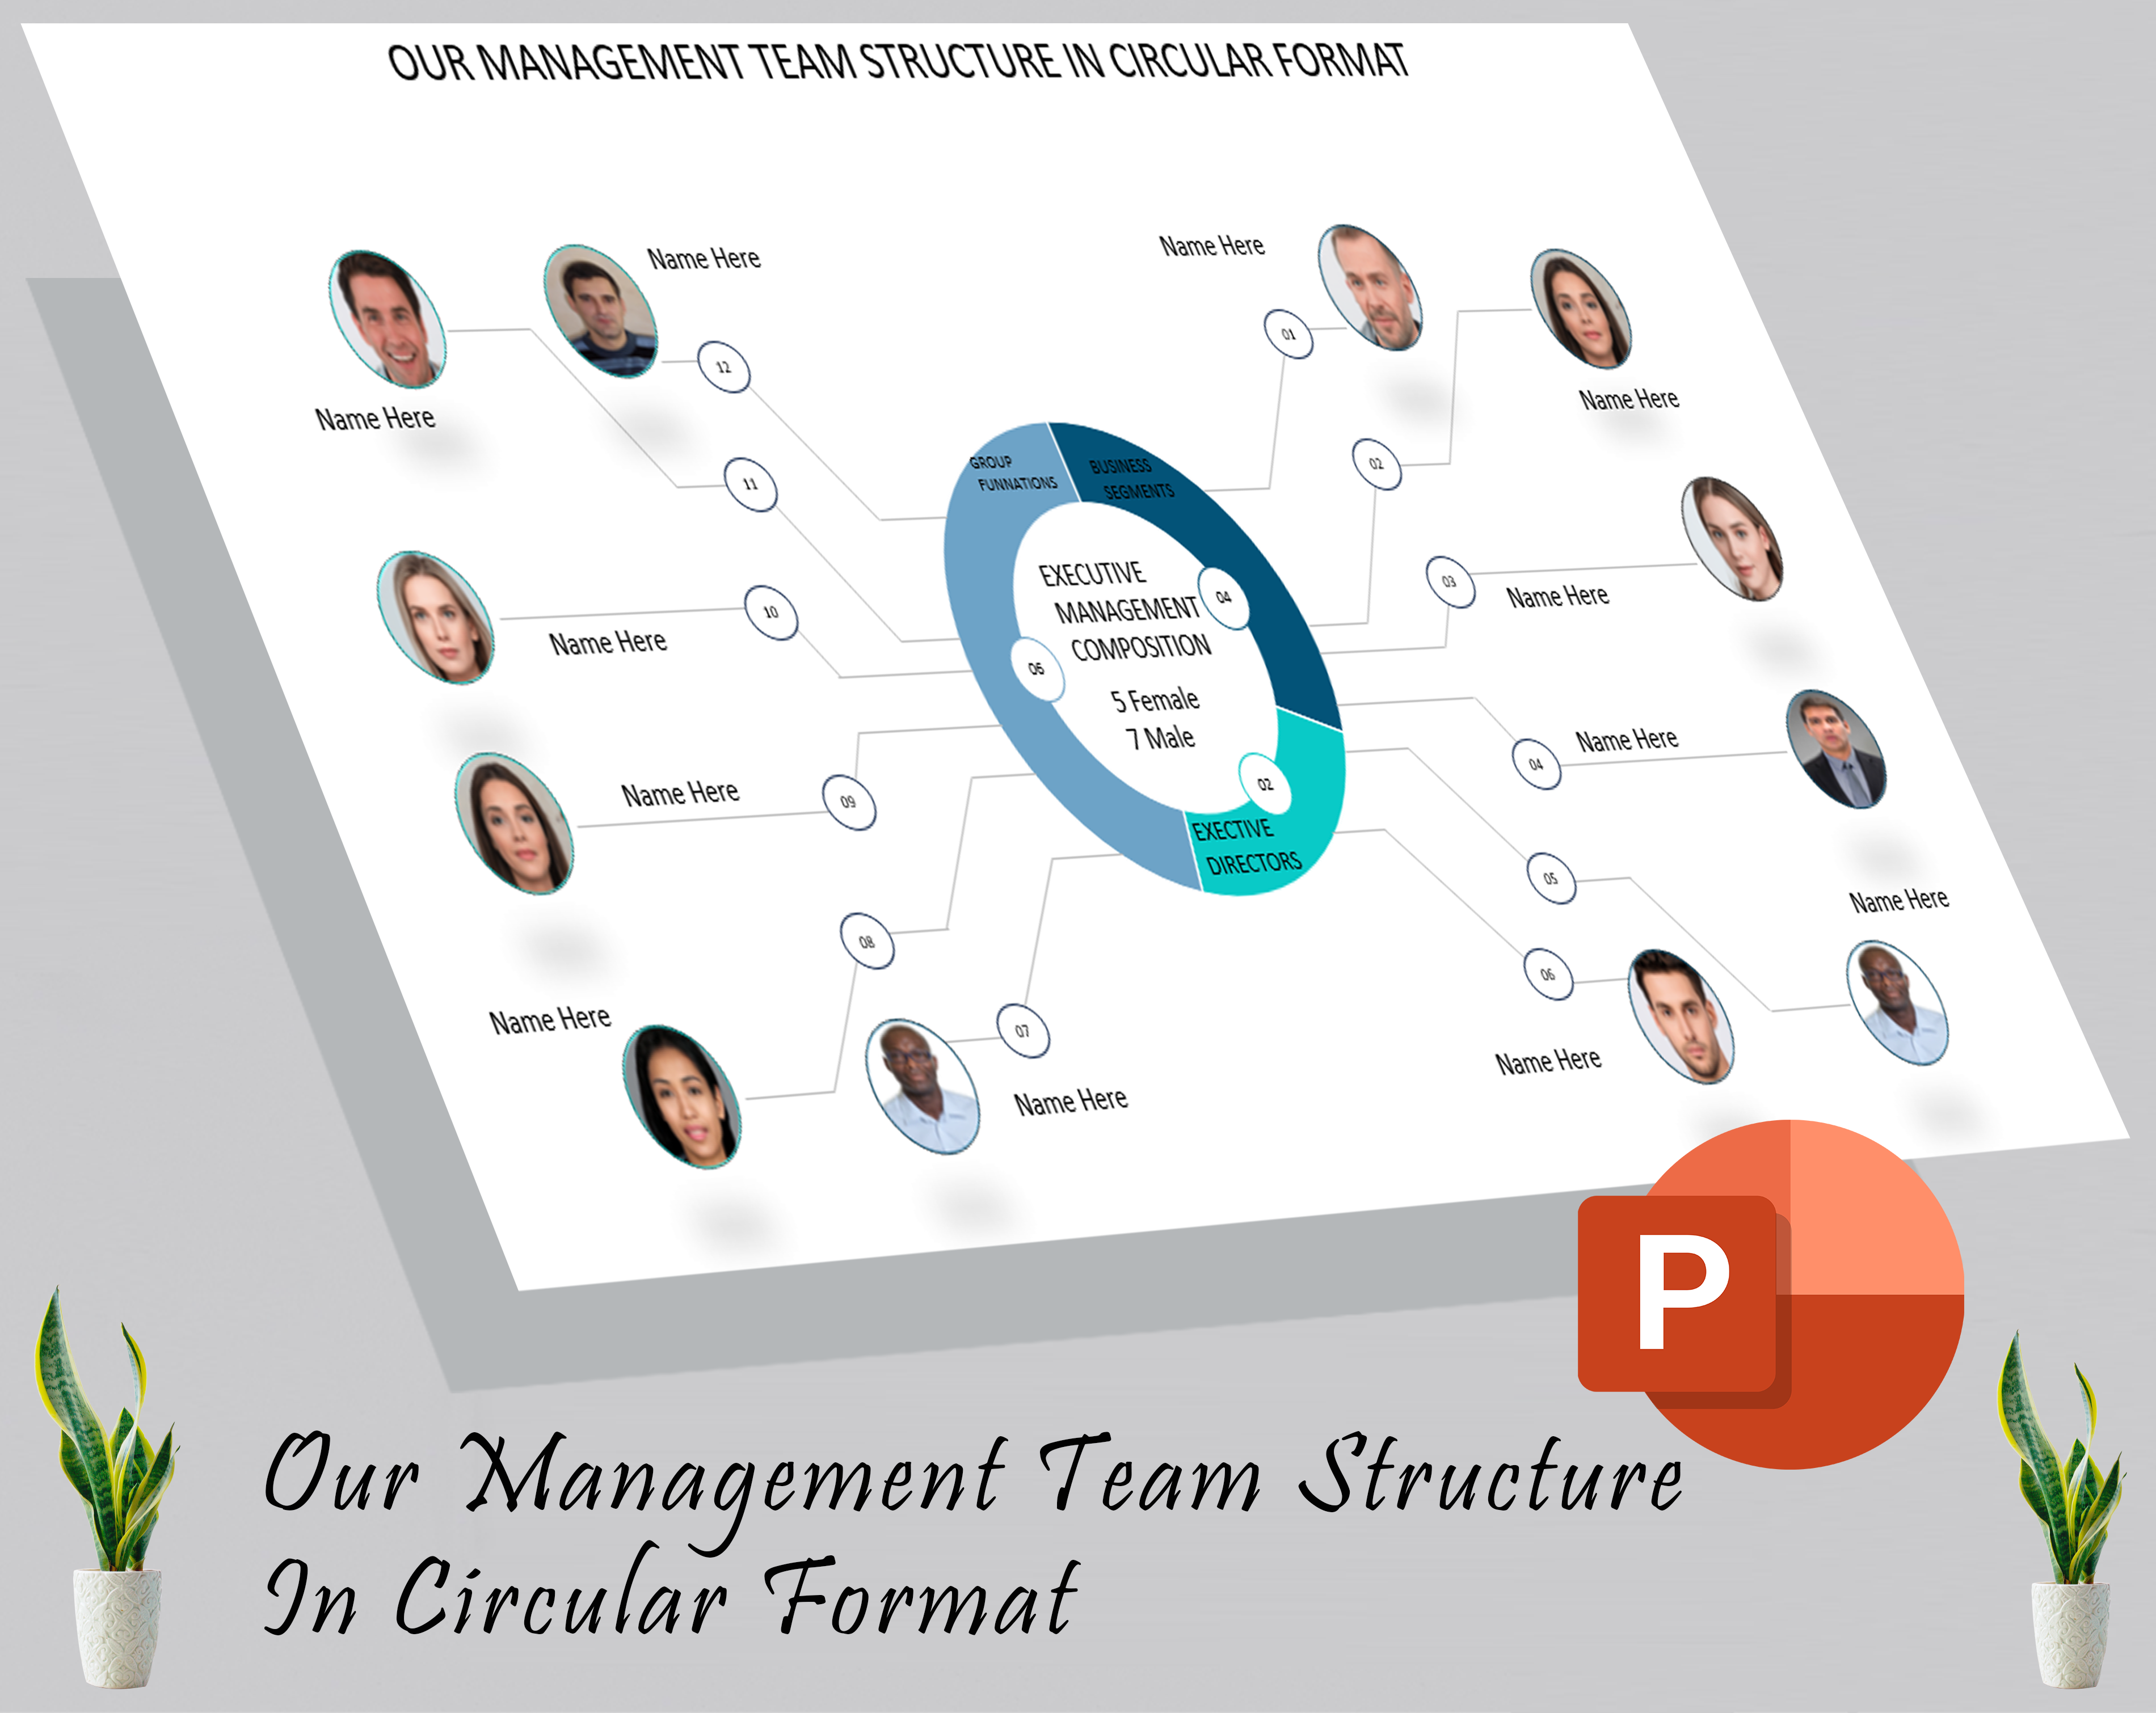 Our management team structure in circular format